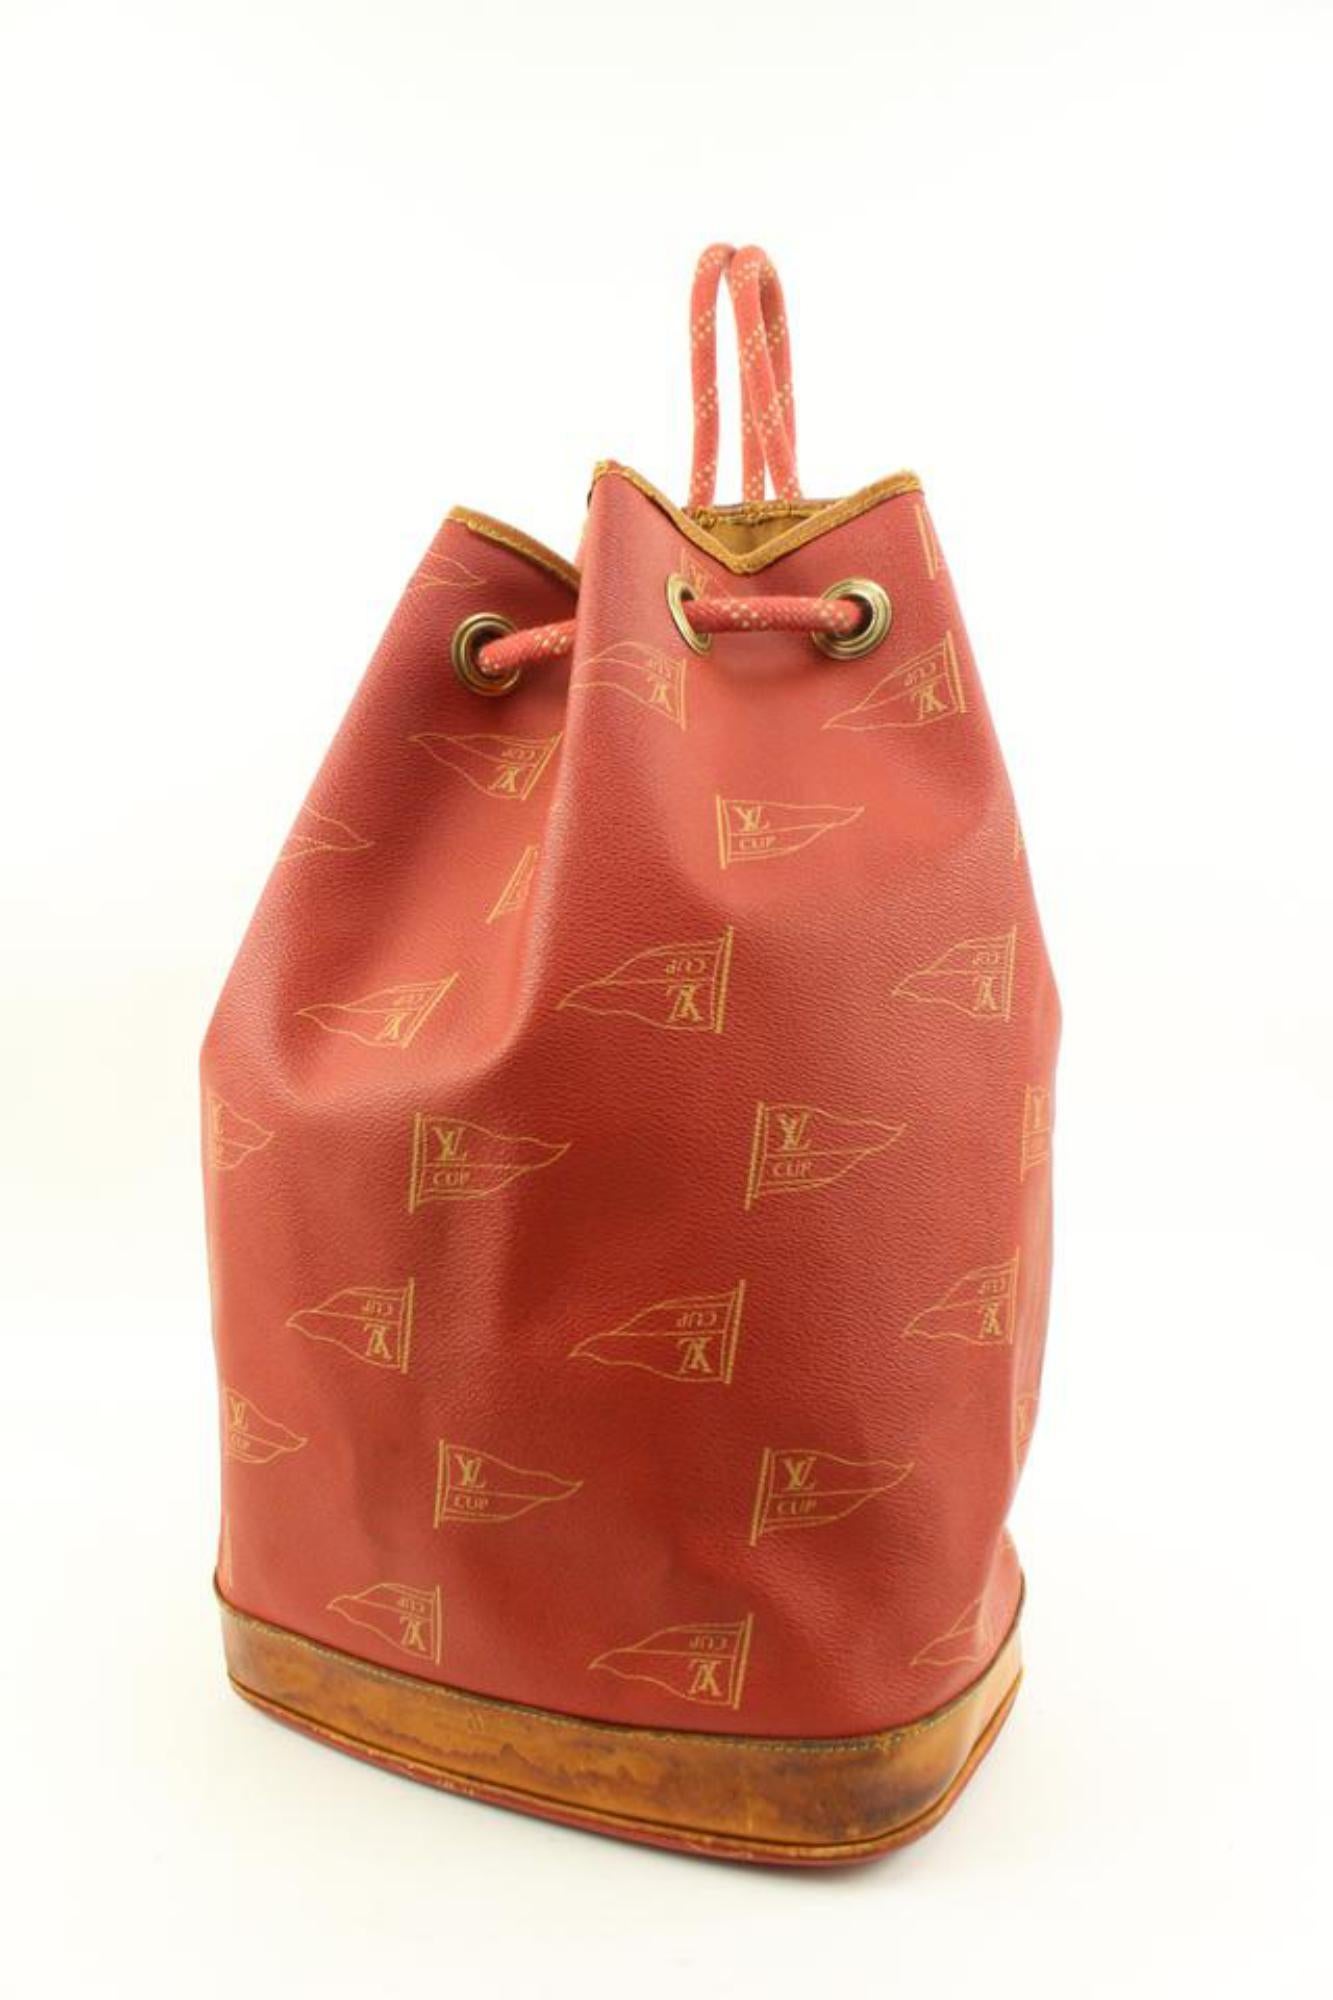 Louis Vuitton 1995 LV Cup Red St Tropez Drawstring Bucket Hobo 97lv228s
Date Code/Serial Number: SP0974
Made In: France
Measurements: Length:  15.5